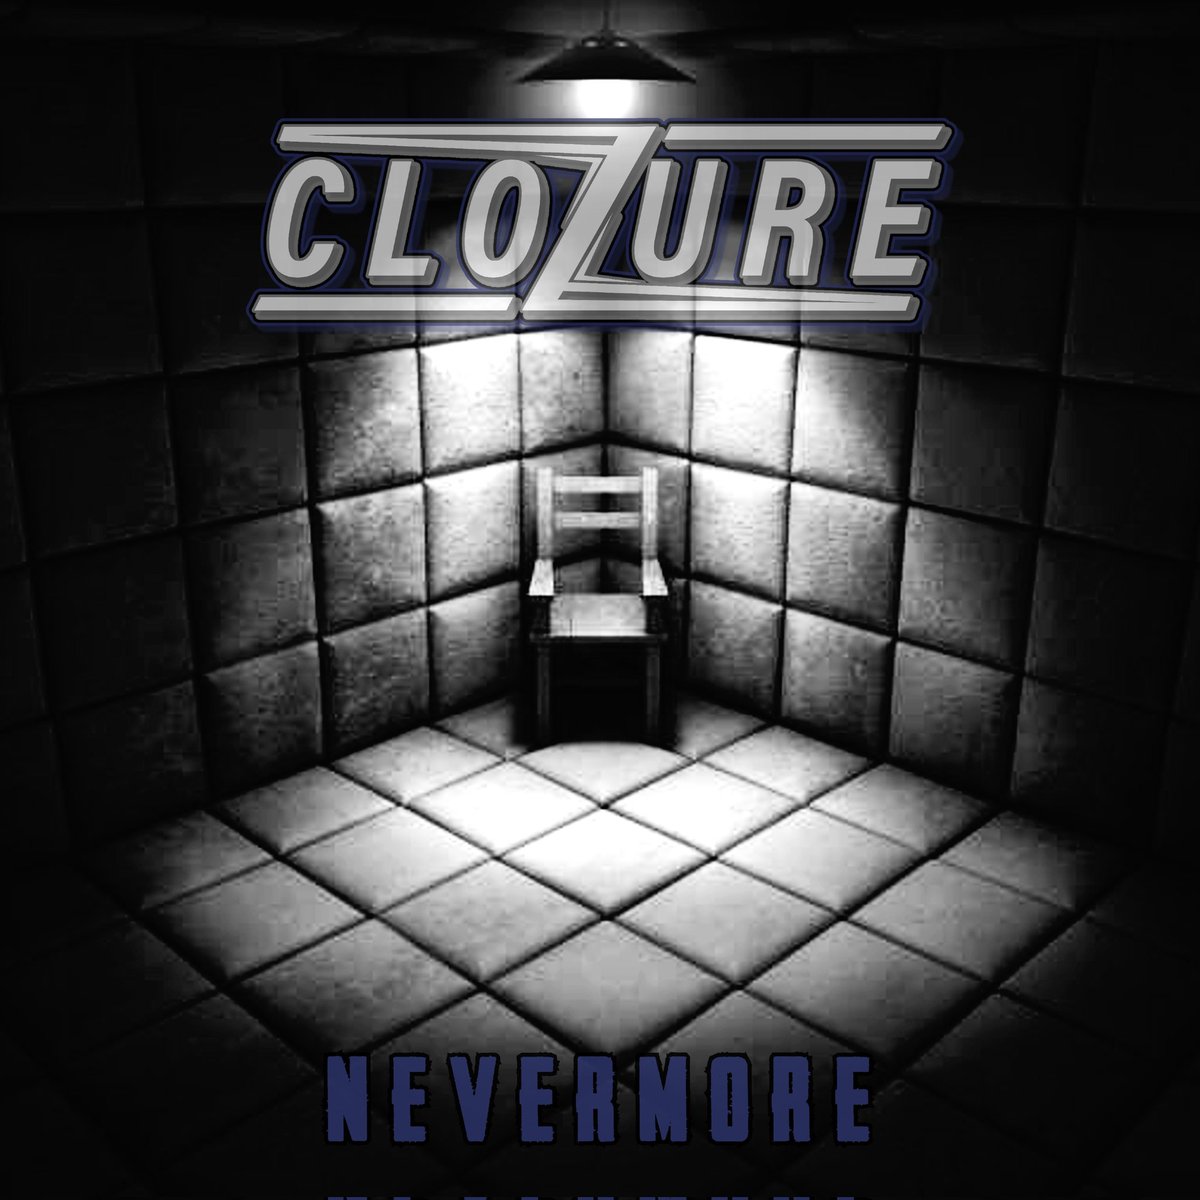 MM Radio bringing you 100% pure eargasm with CloZure - Nevermore 💥 Listen here on mm-radio.com #CloZure @officialclozure @MKMusicUSA